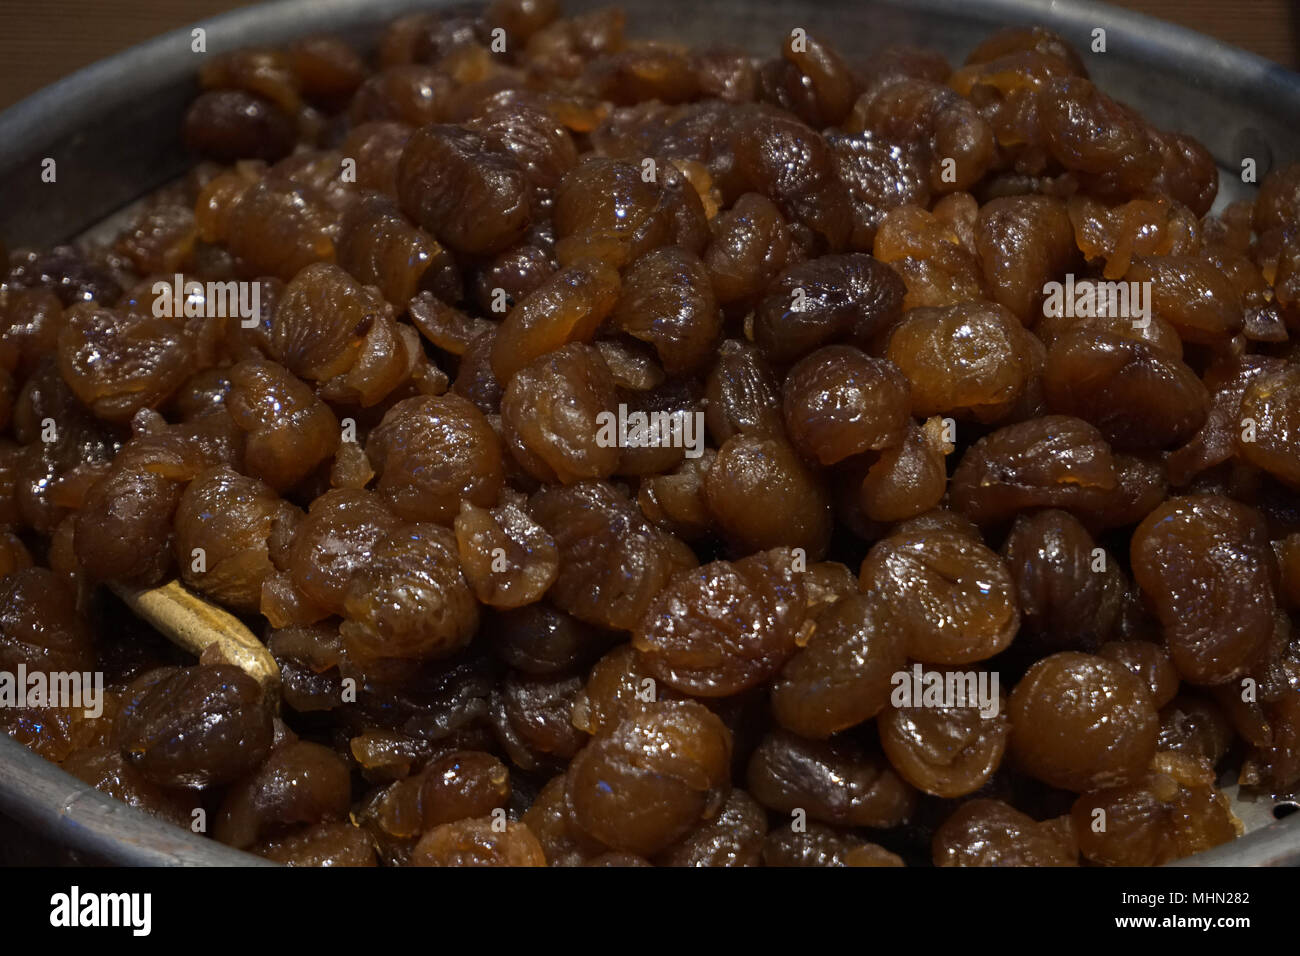 Marrons glaces stock photo. Image of marrons, chestnut - 46026158